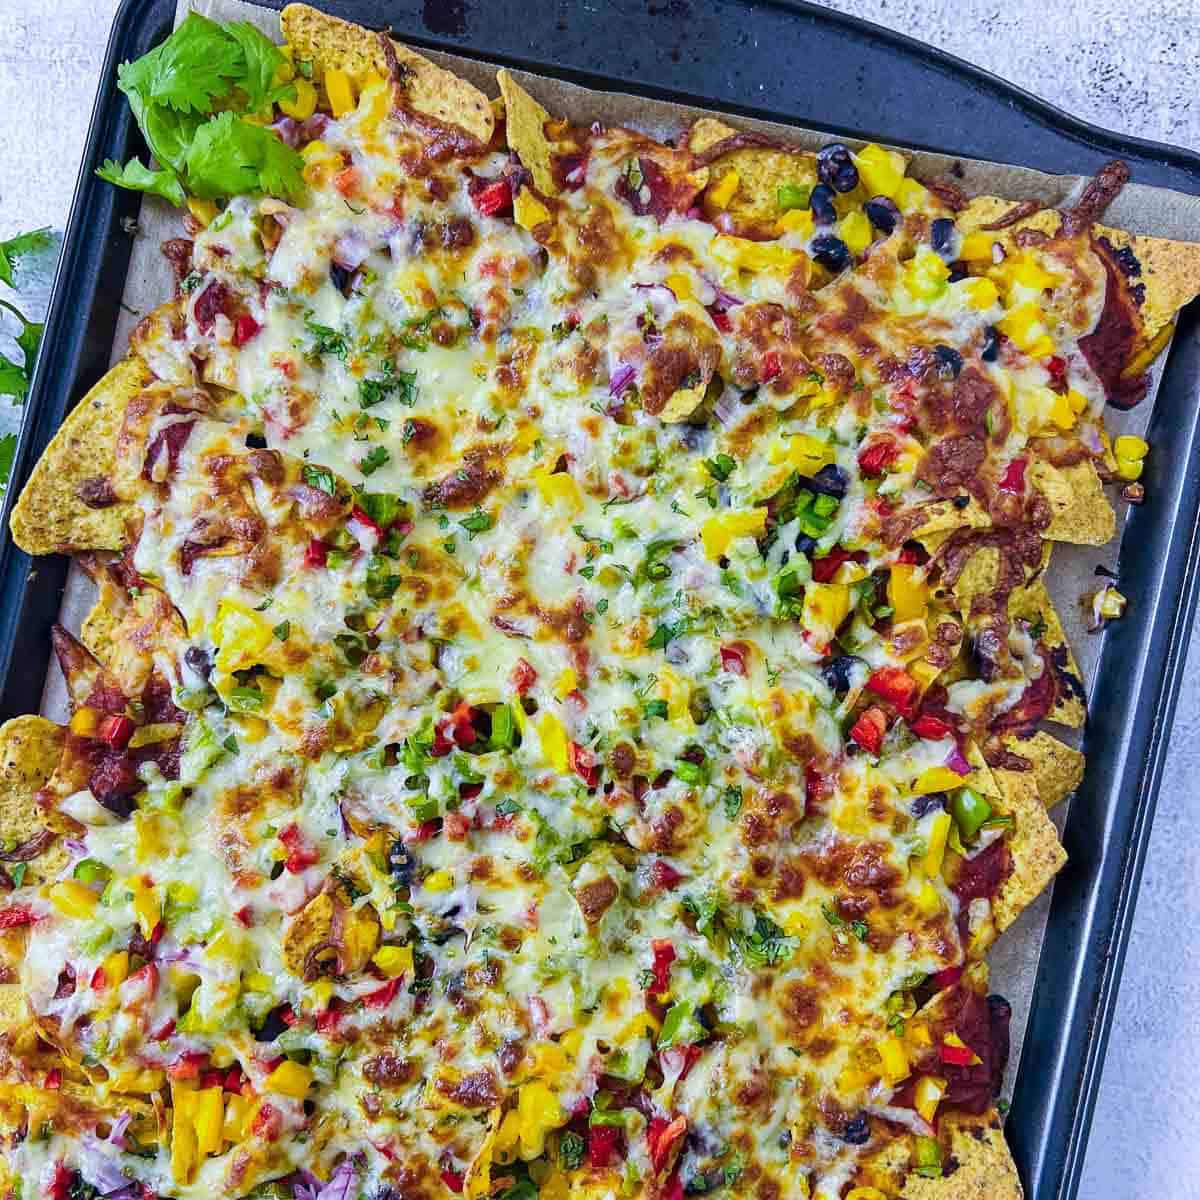 Loaded nachos after baking with cheese melted and slightly golden brown.